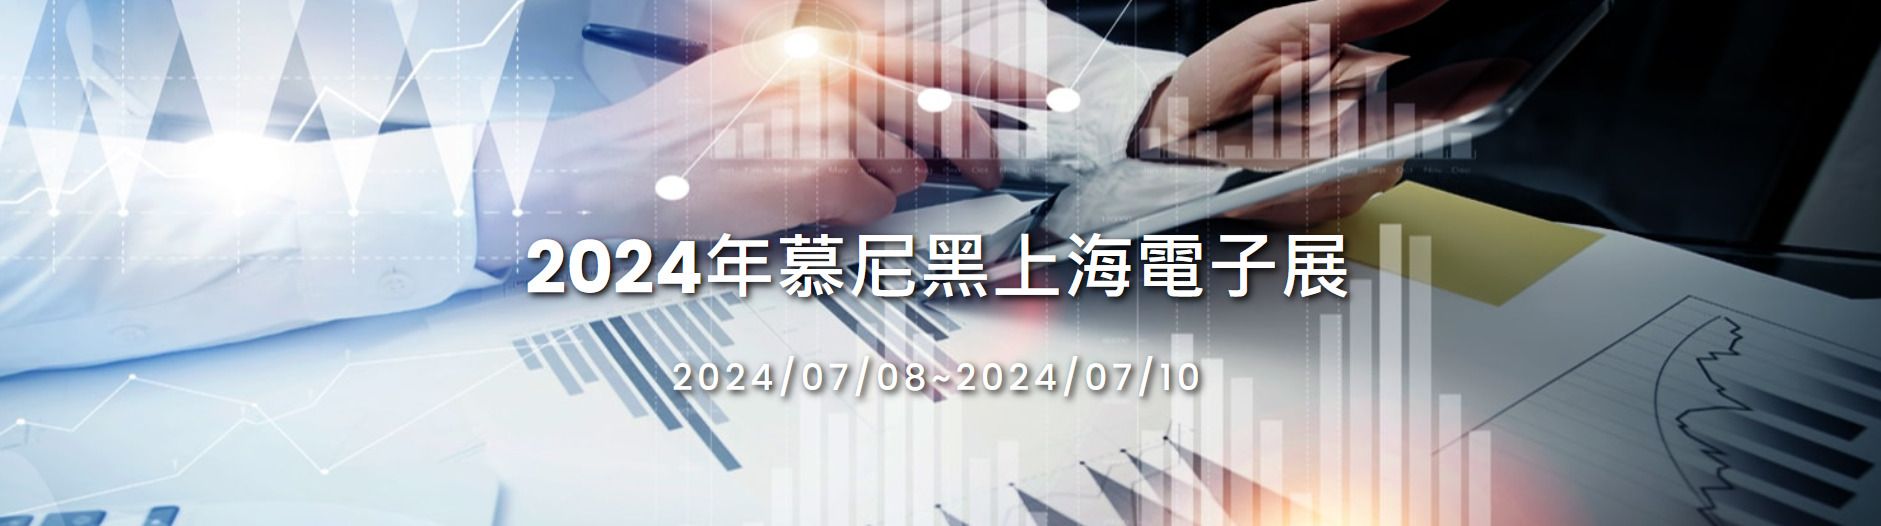 JCON Attend  Electronica China in 2024